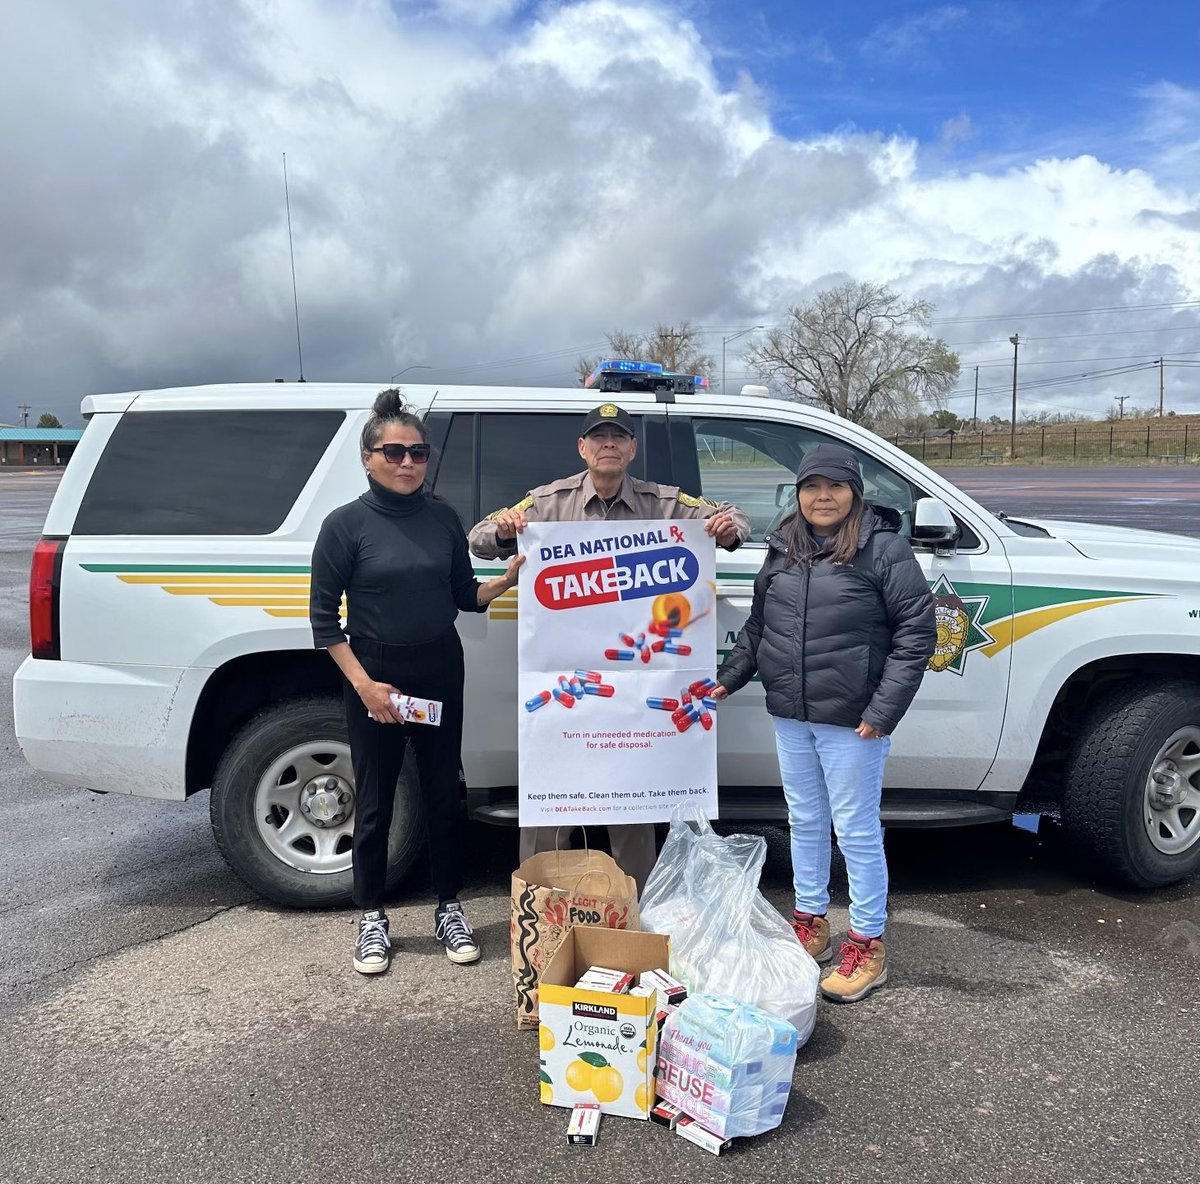 WINDOW ROCK, Ariz. - What a great turnout this afternoon at the DEA Nat’l RX Takeback, for the 'NN Wide RX Disposal Day,'  located at the NN Fairgrounds.

A HUGE thanks to everyone who dropped off their unneeded medication! We are always appreciative of our supportive community!